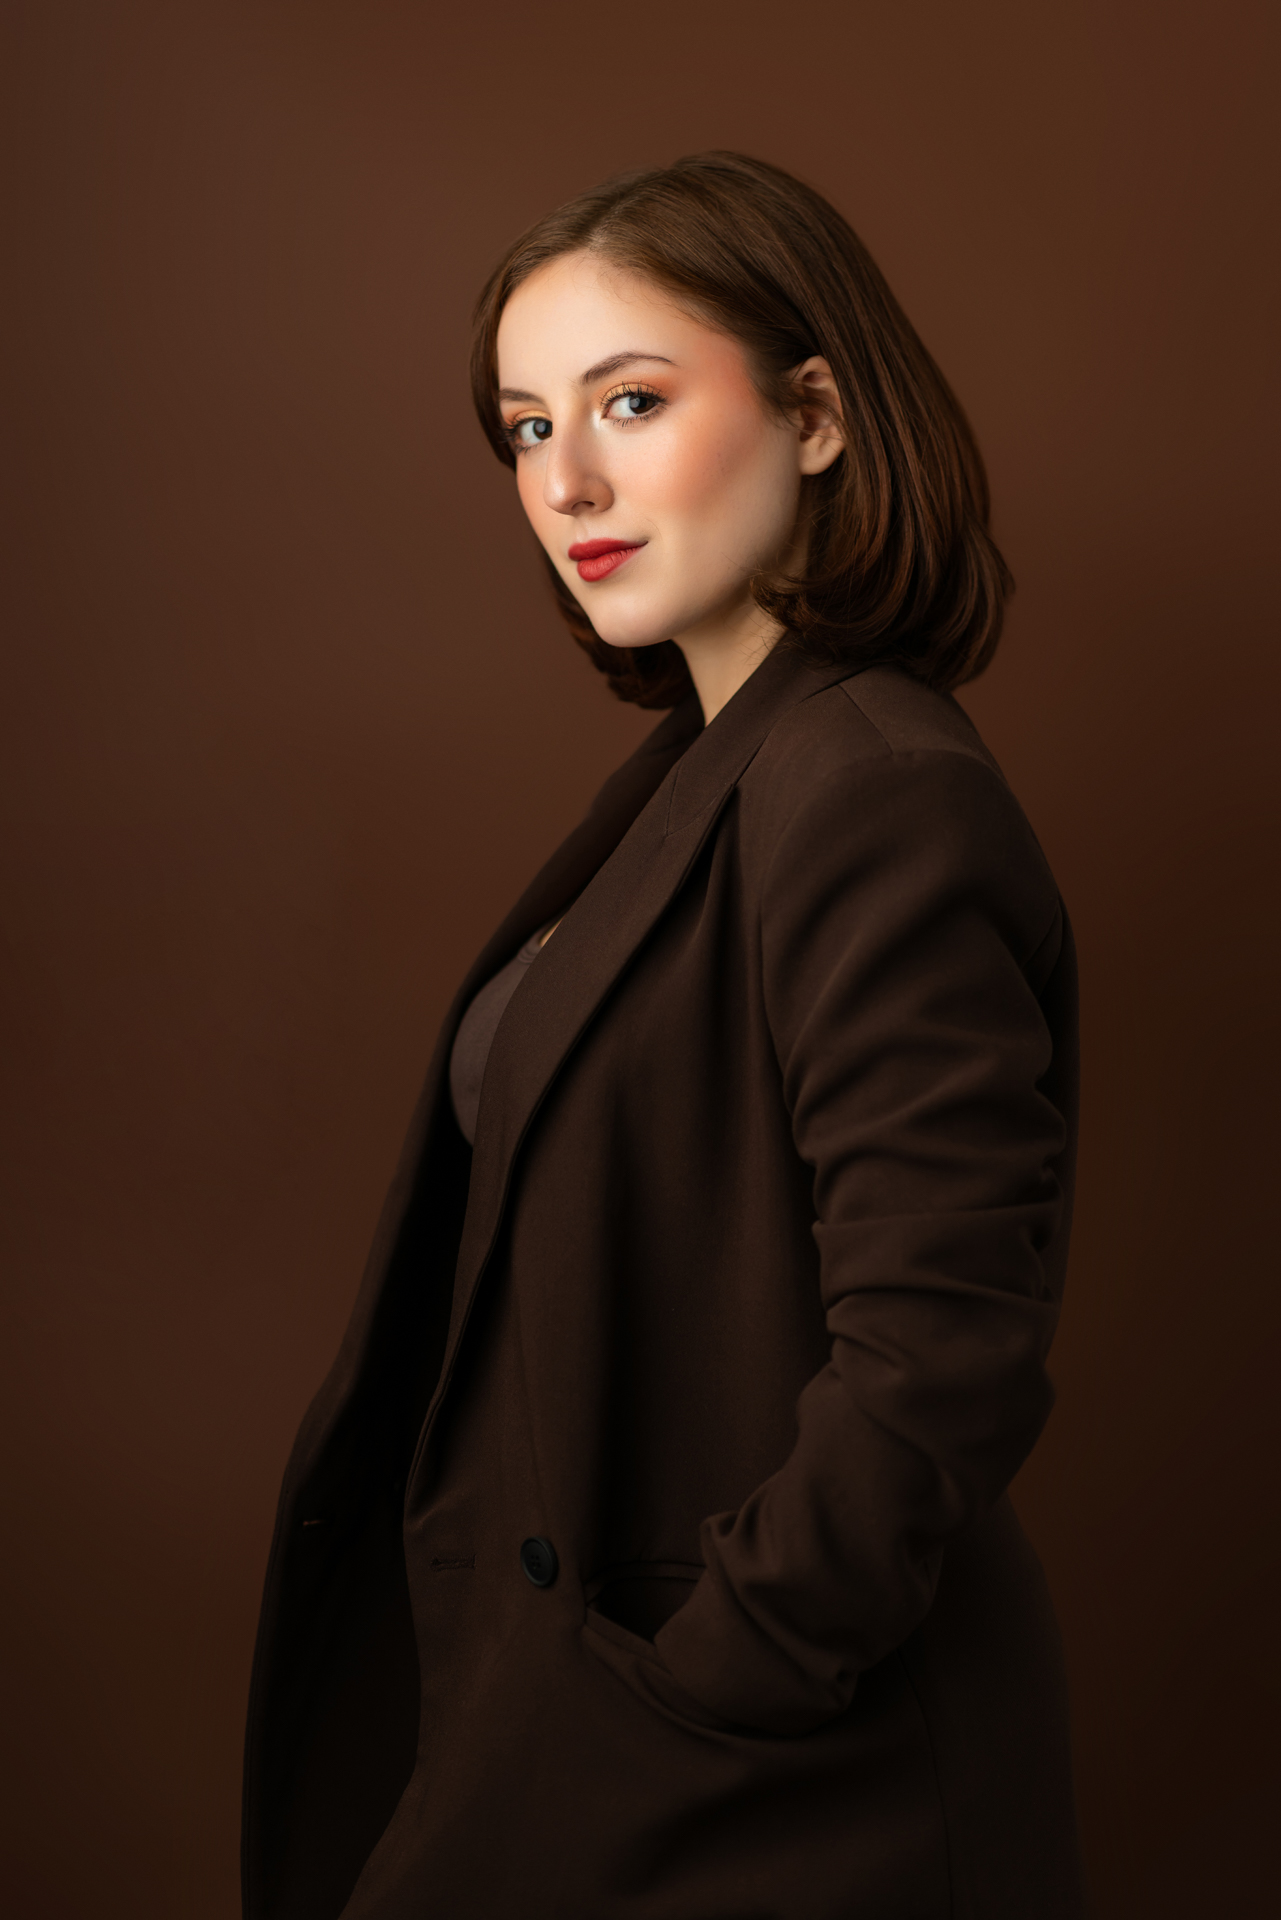 Professional musician headshot of young woman in brown blazer on matching brown background